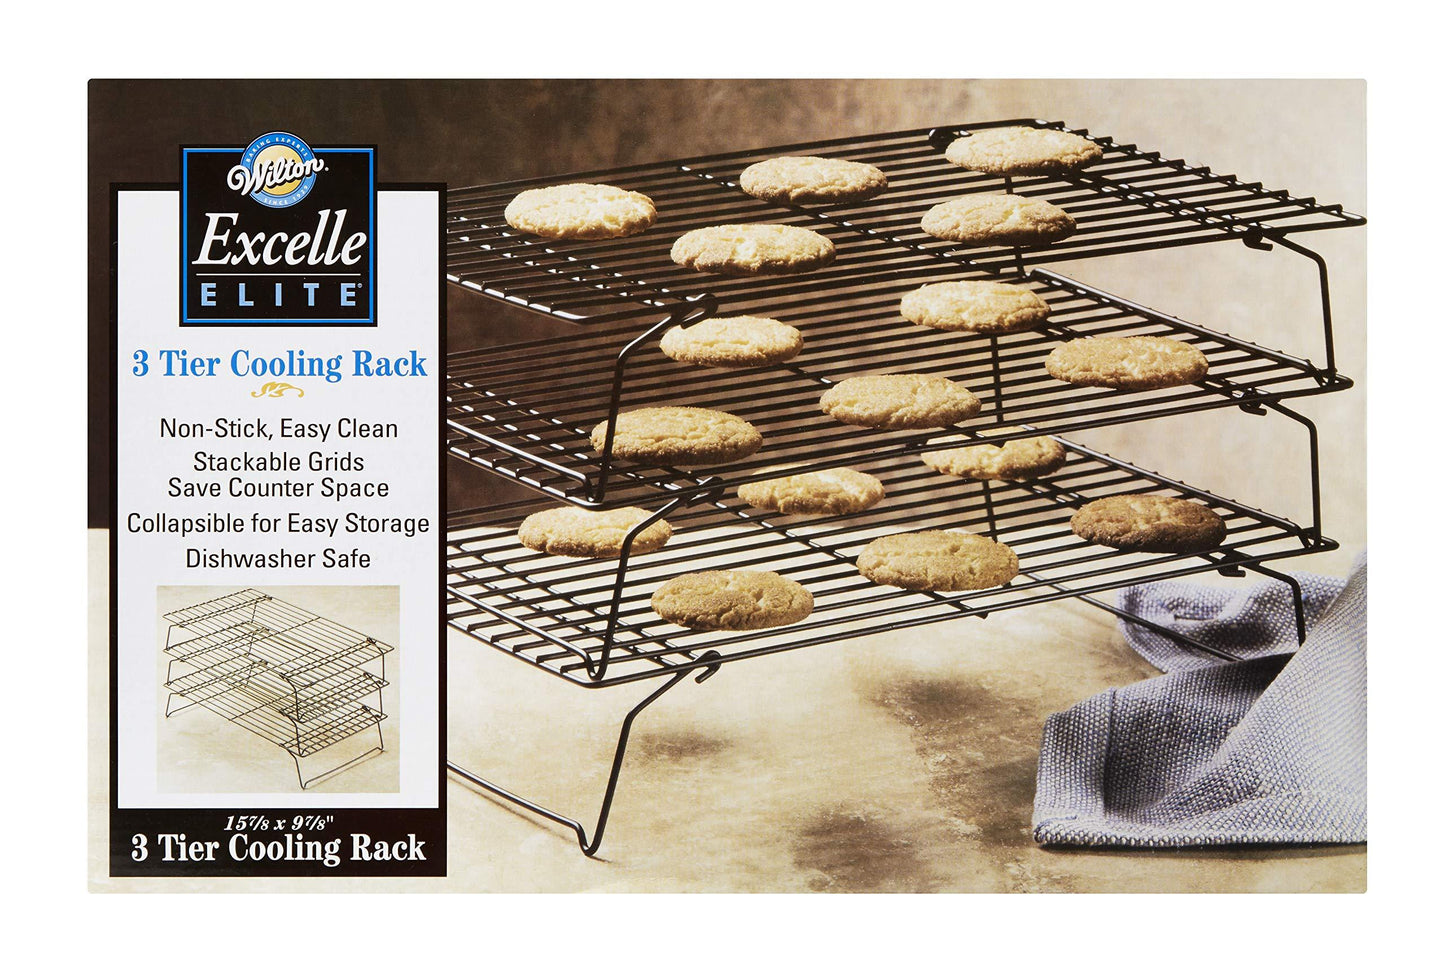 Wilton Excelle Elite 3-Tier Cooling Rack for Cookies, Cake and More - Cool Batches of Cookies, Cake Layers or Finger Foods, Black - CookCave